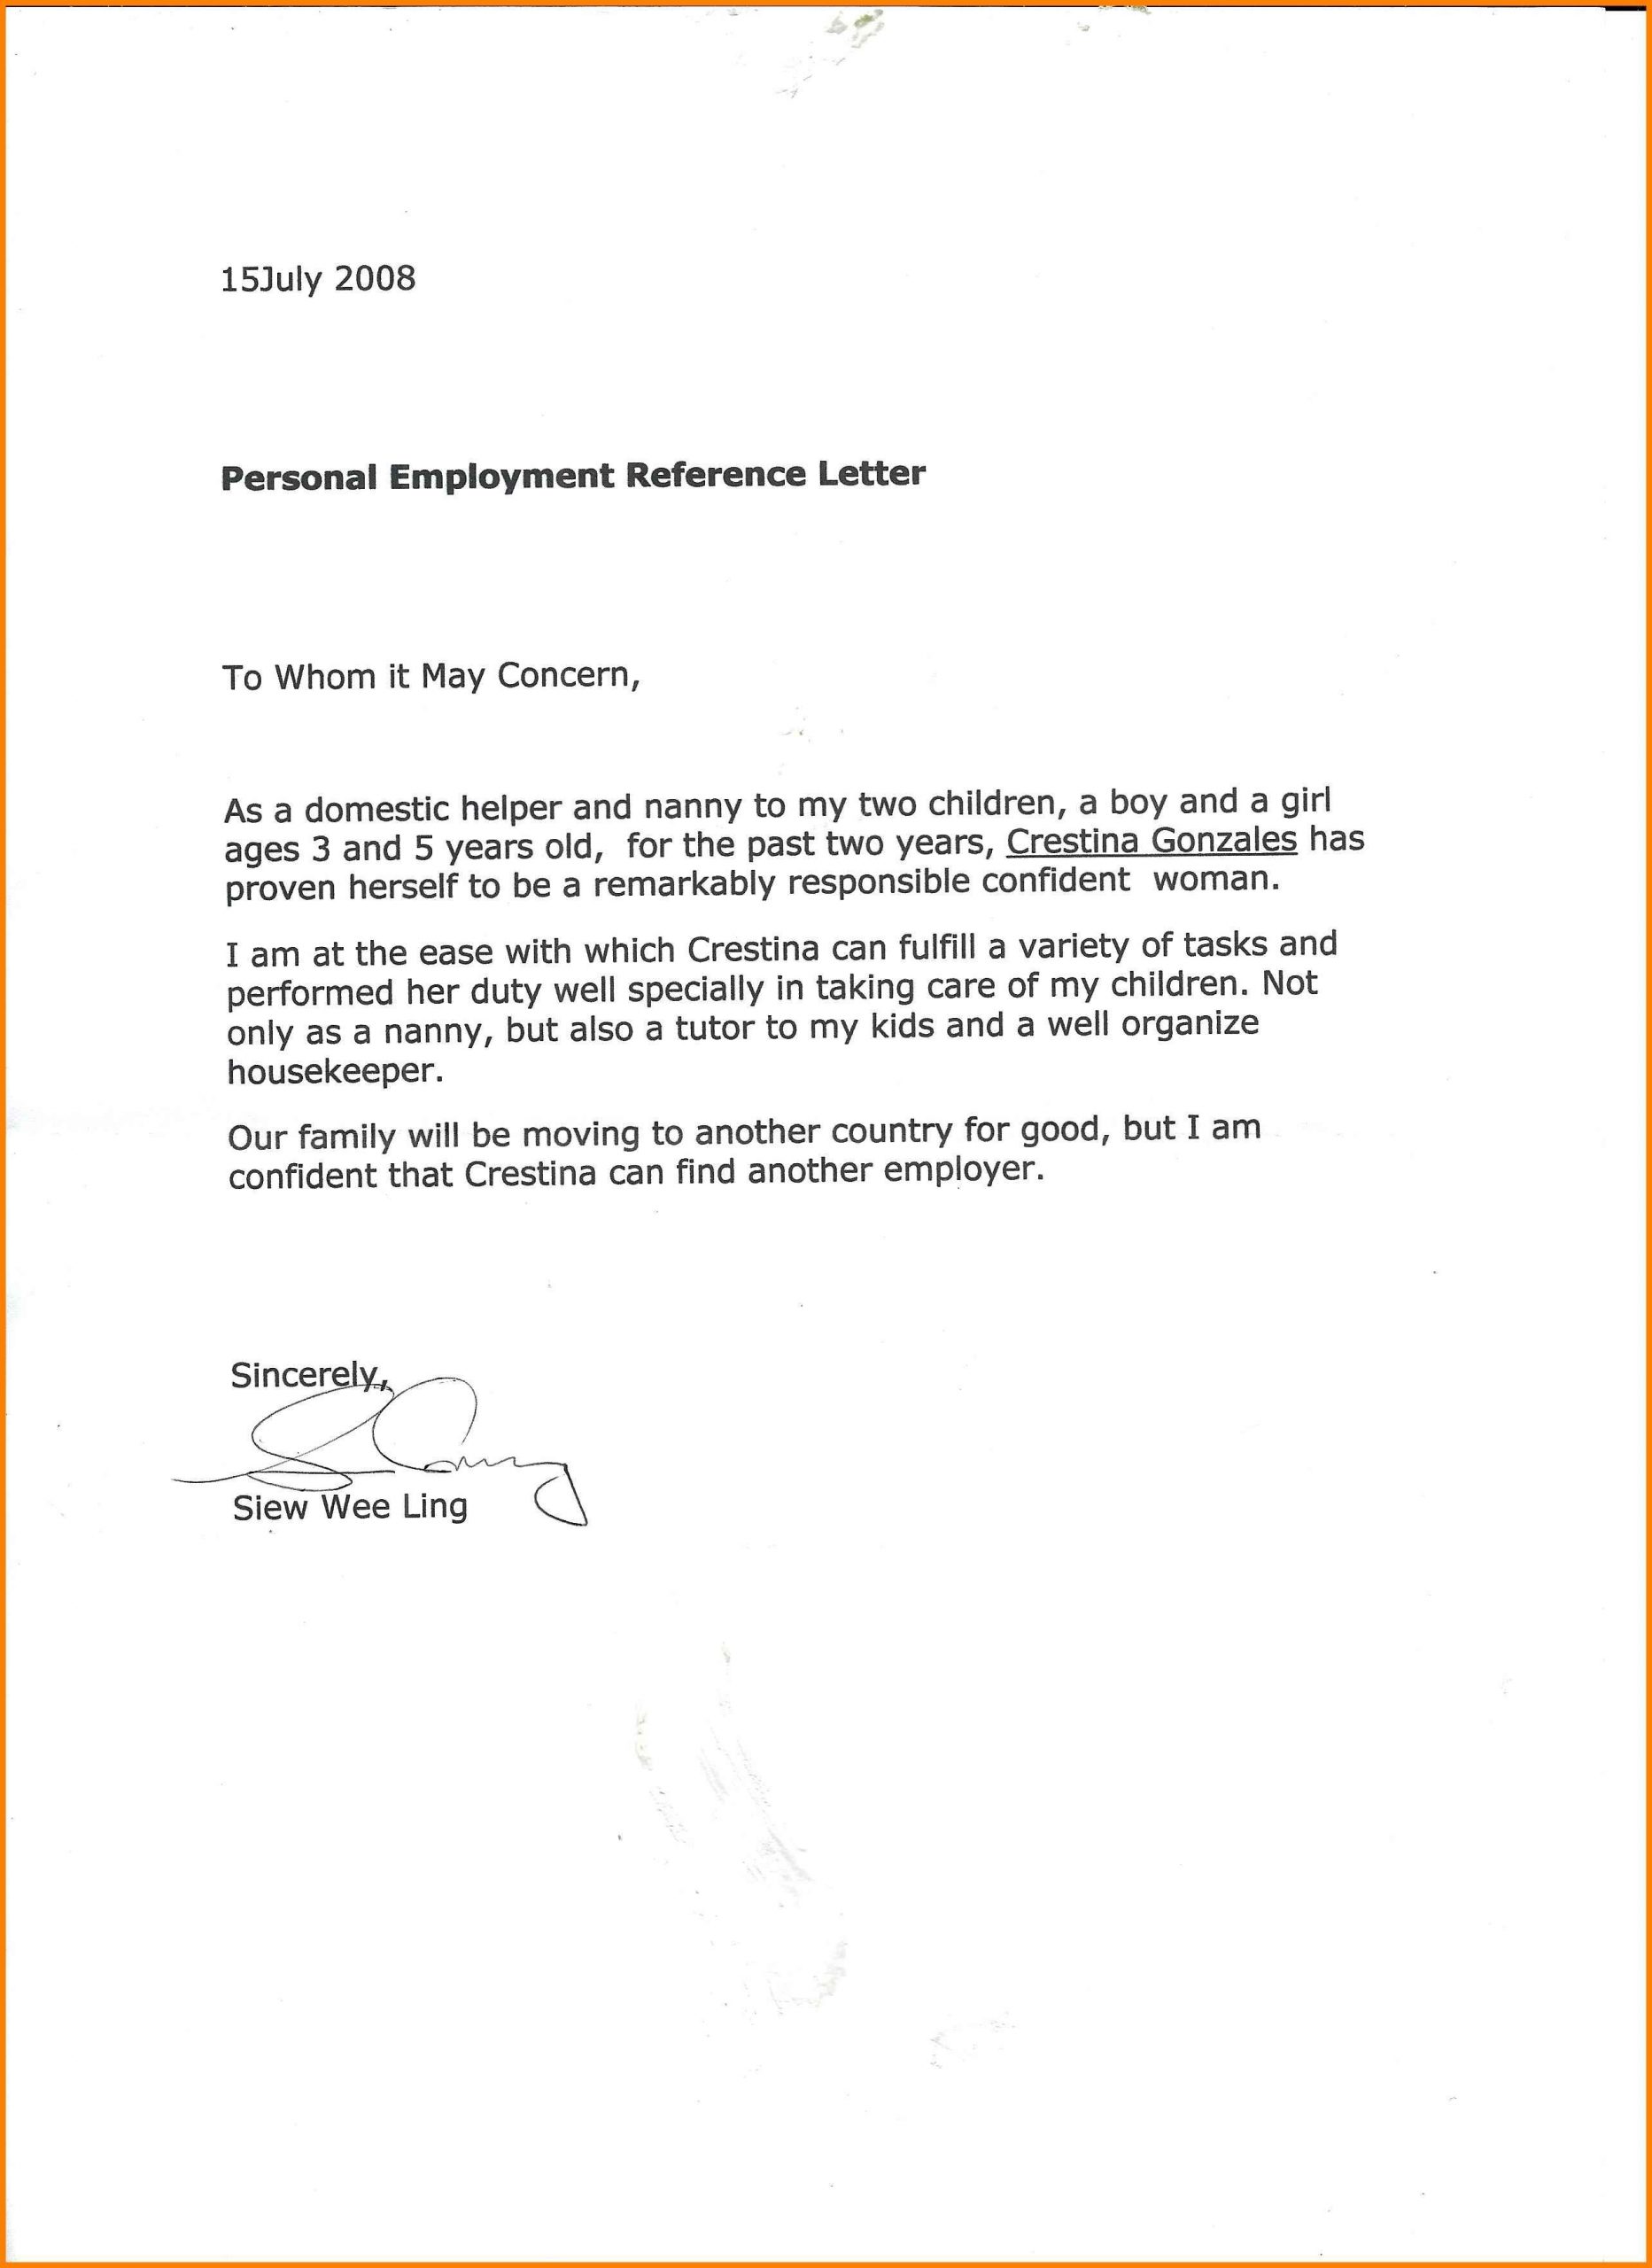 Caregiver Reference Letter From Employer Debandje within dimensions 2568 X 3525